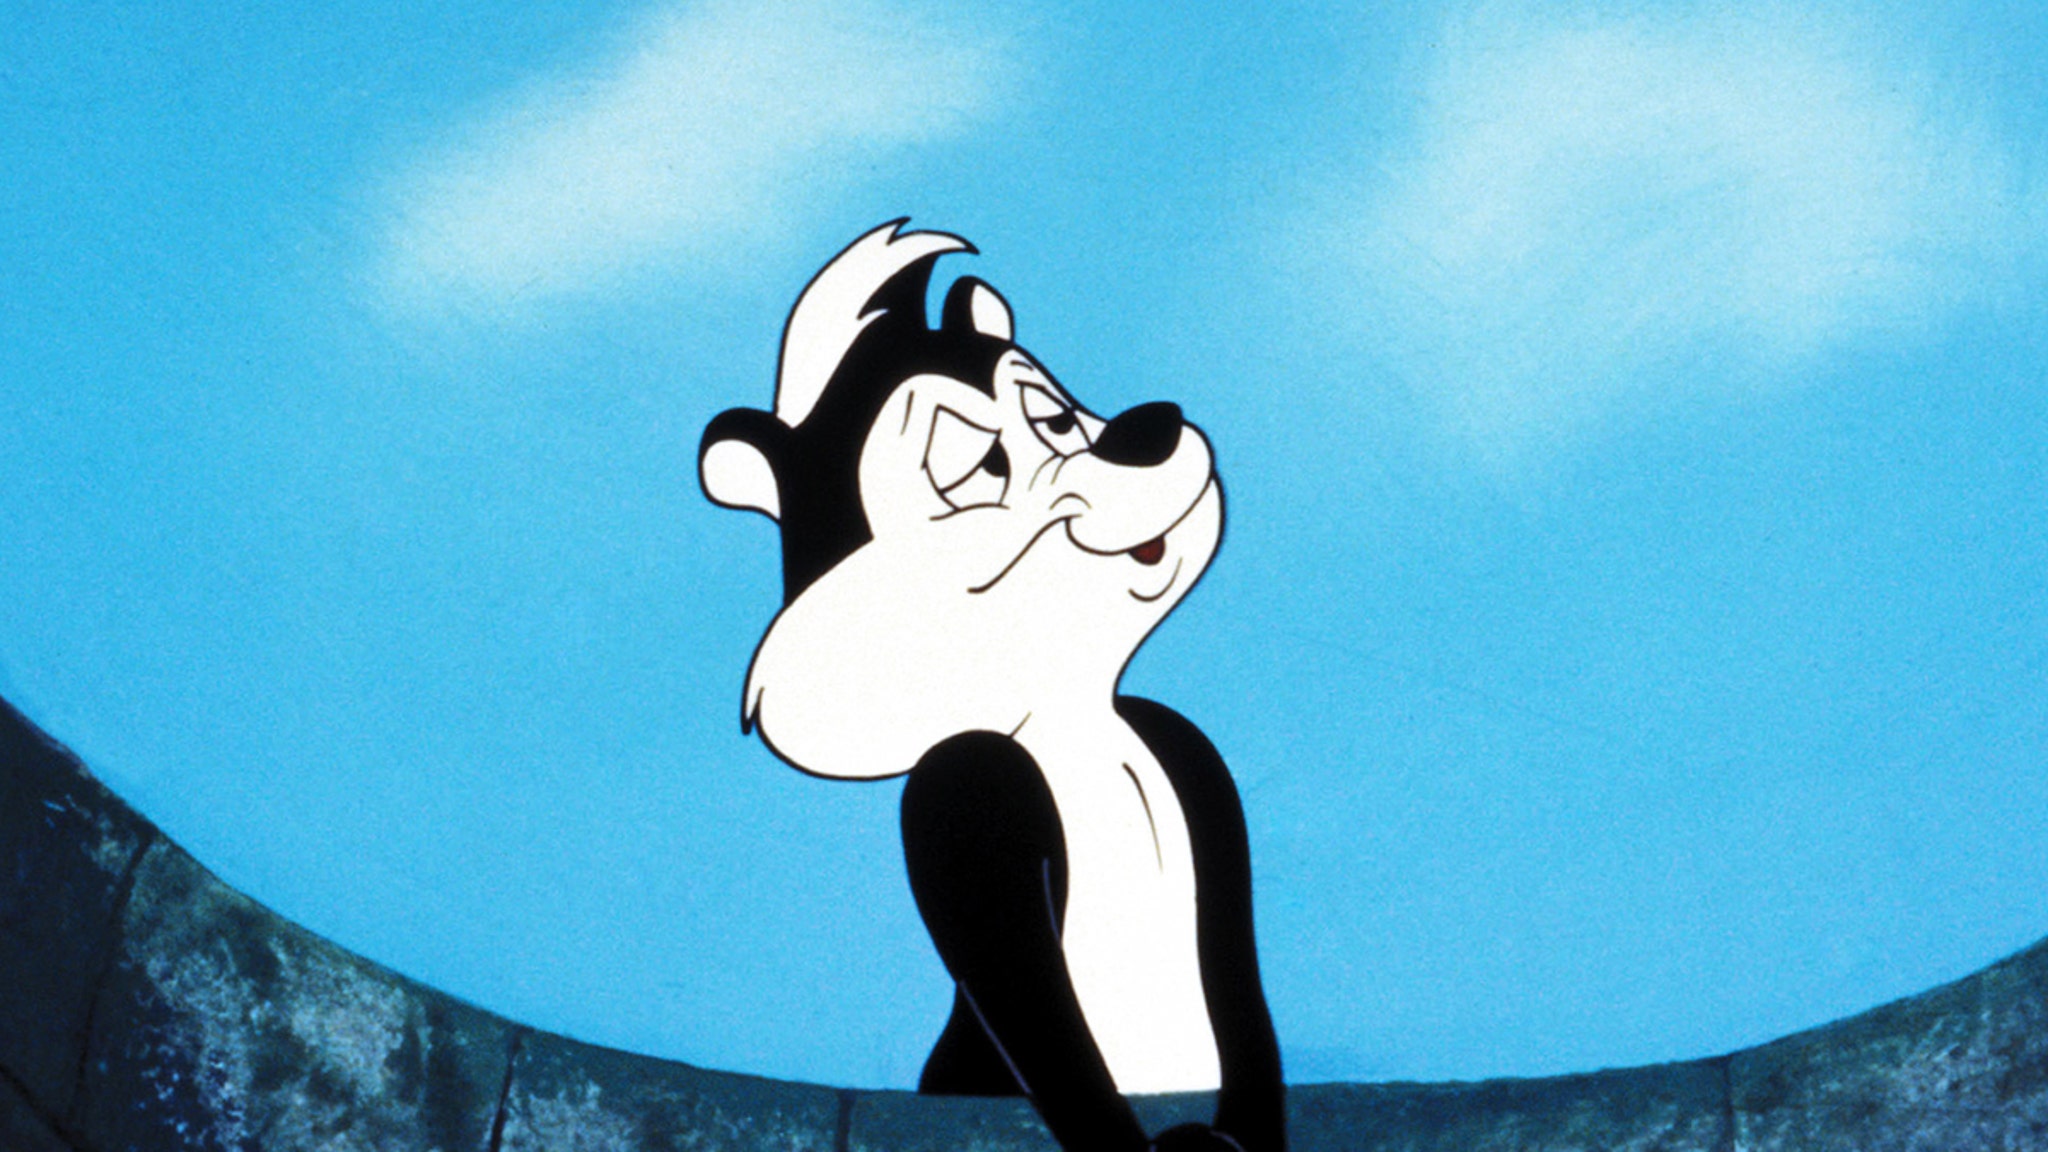 Pepe Le Pew called for the ongoing rape culture in NYT Op-Ed